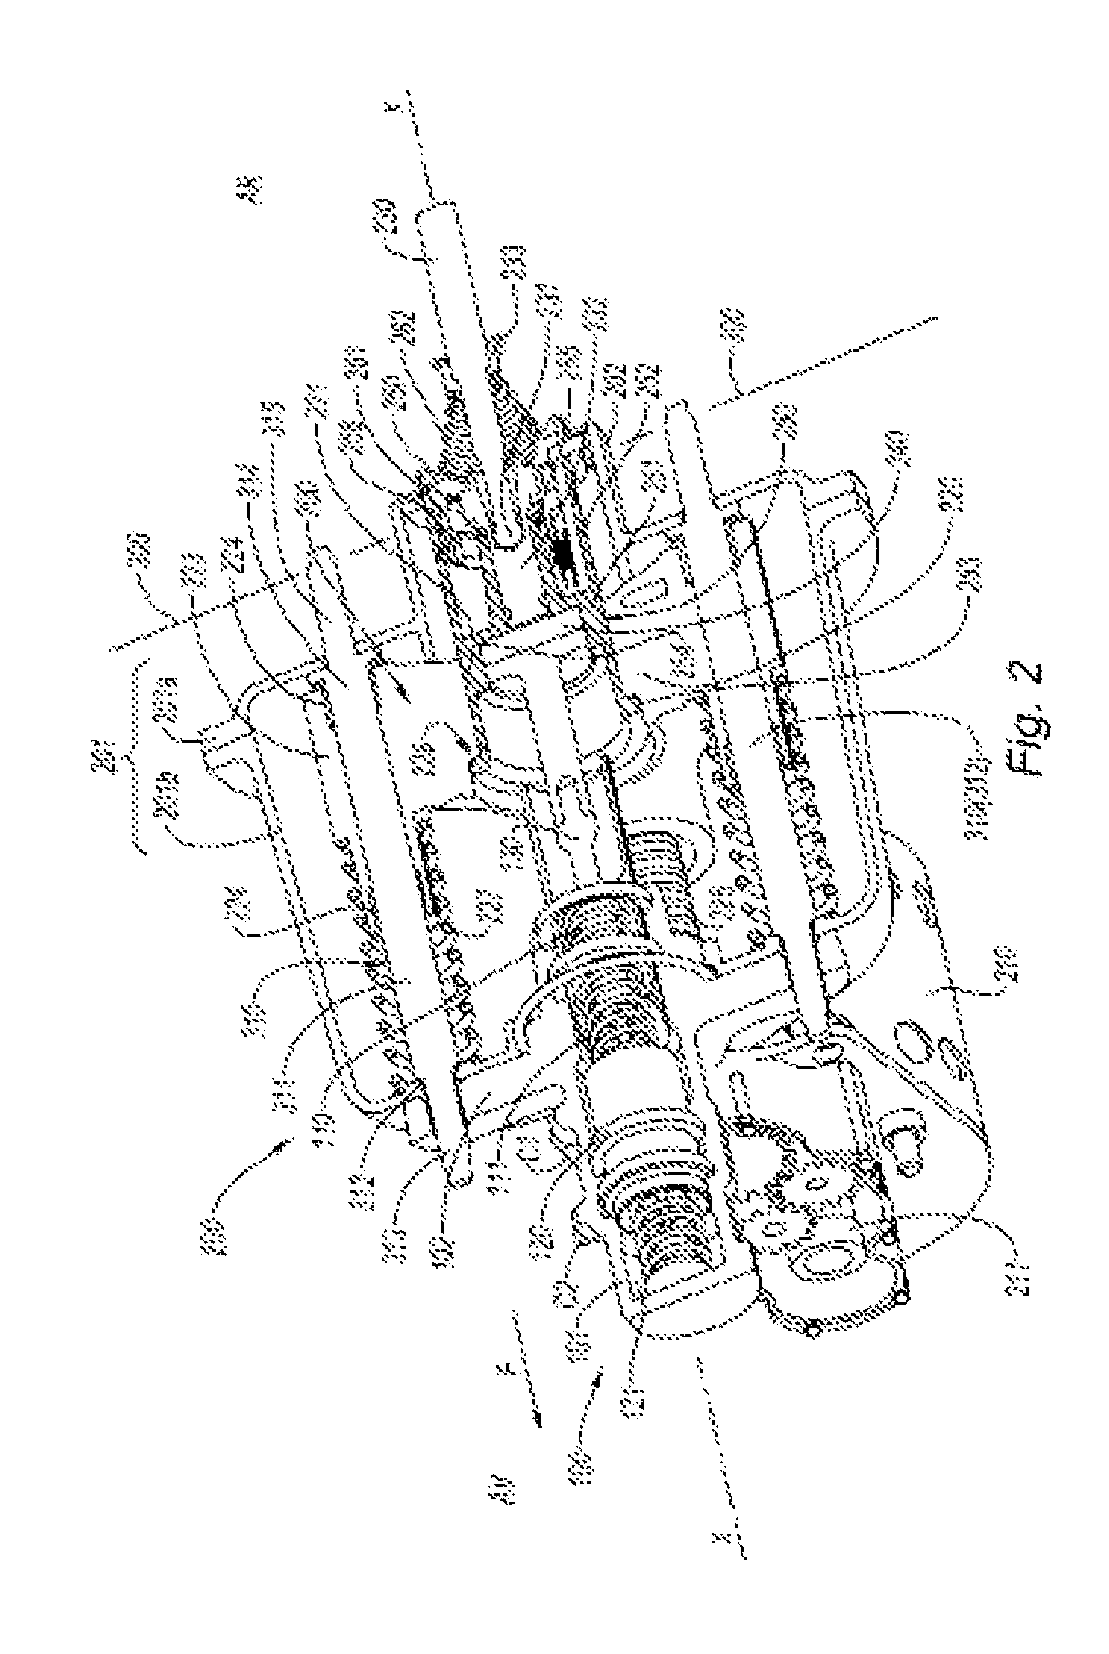 Electrically boosted braking system